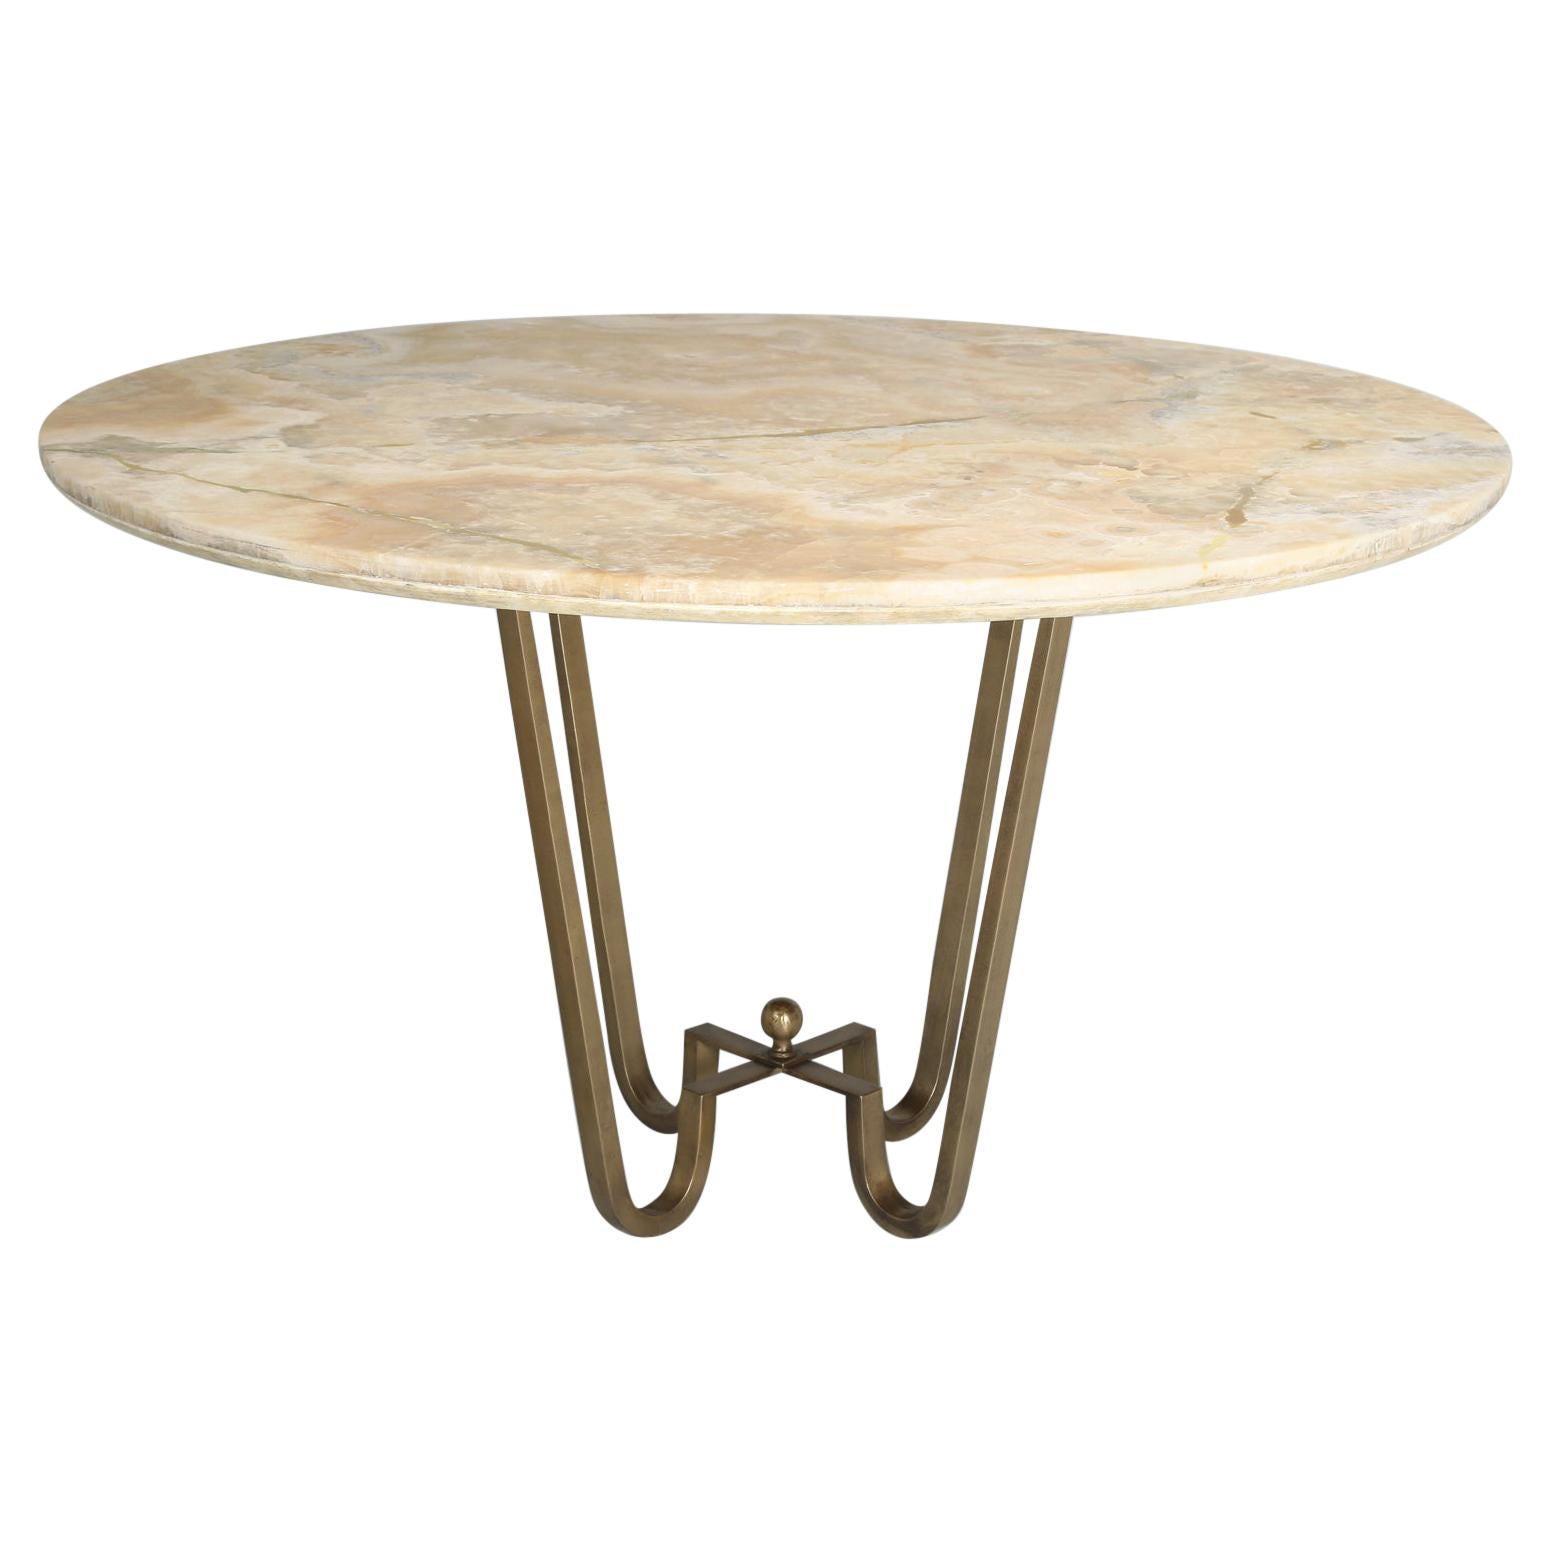 Custom-Made Center Hall Table in Cold Plated Bronze with Onyx Top in Most Sizes